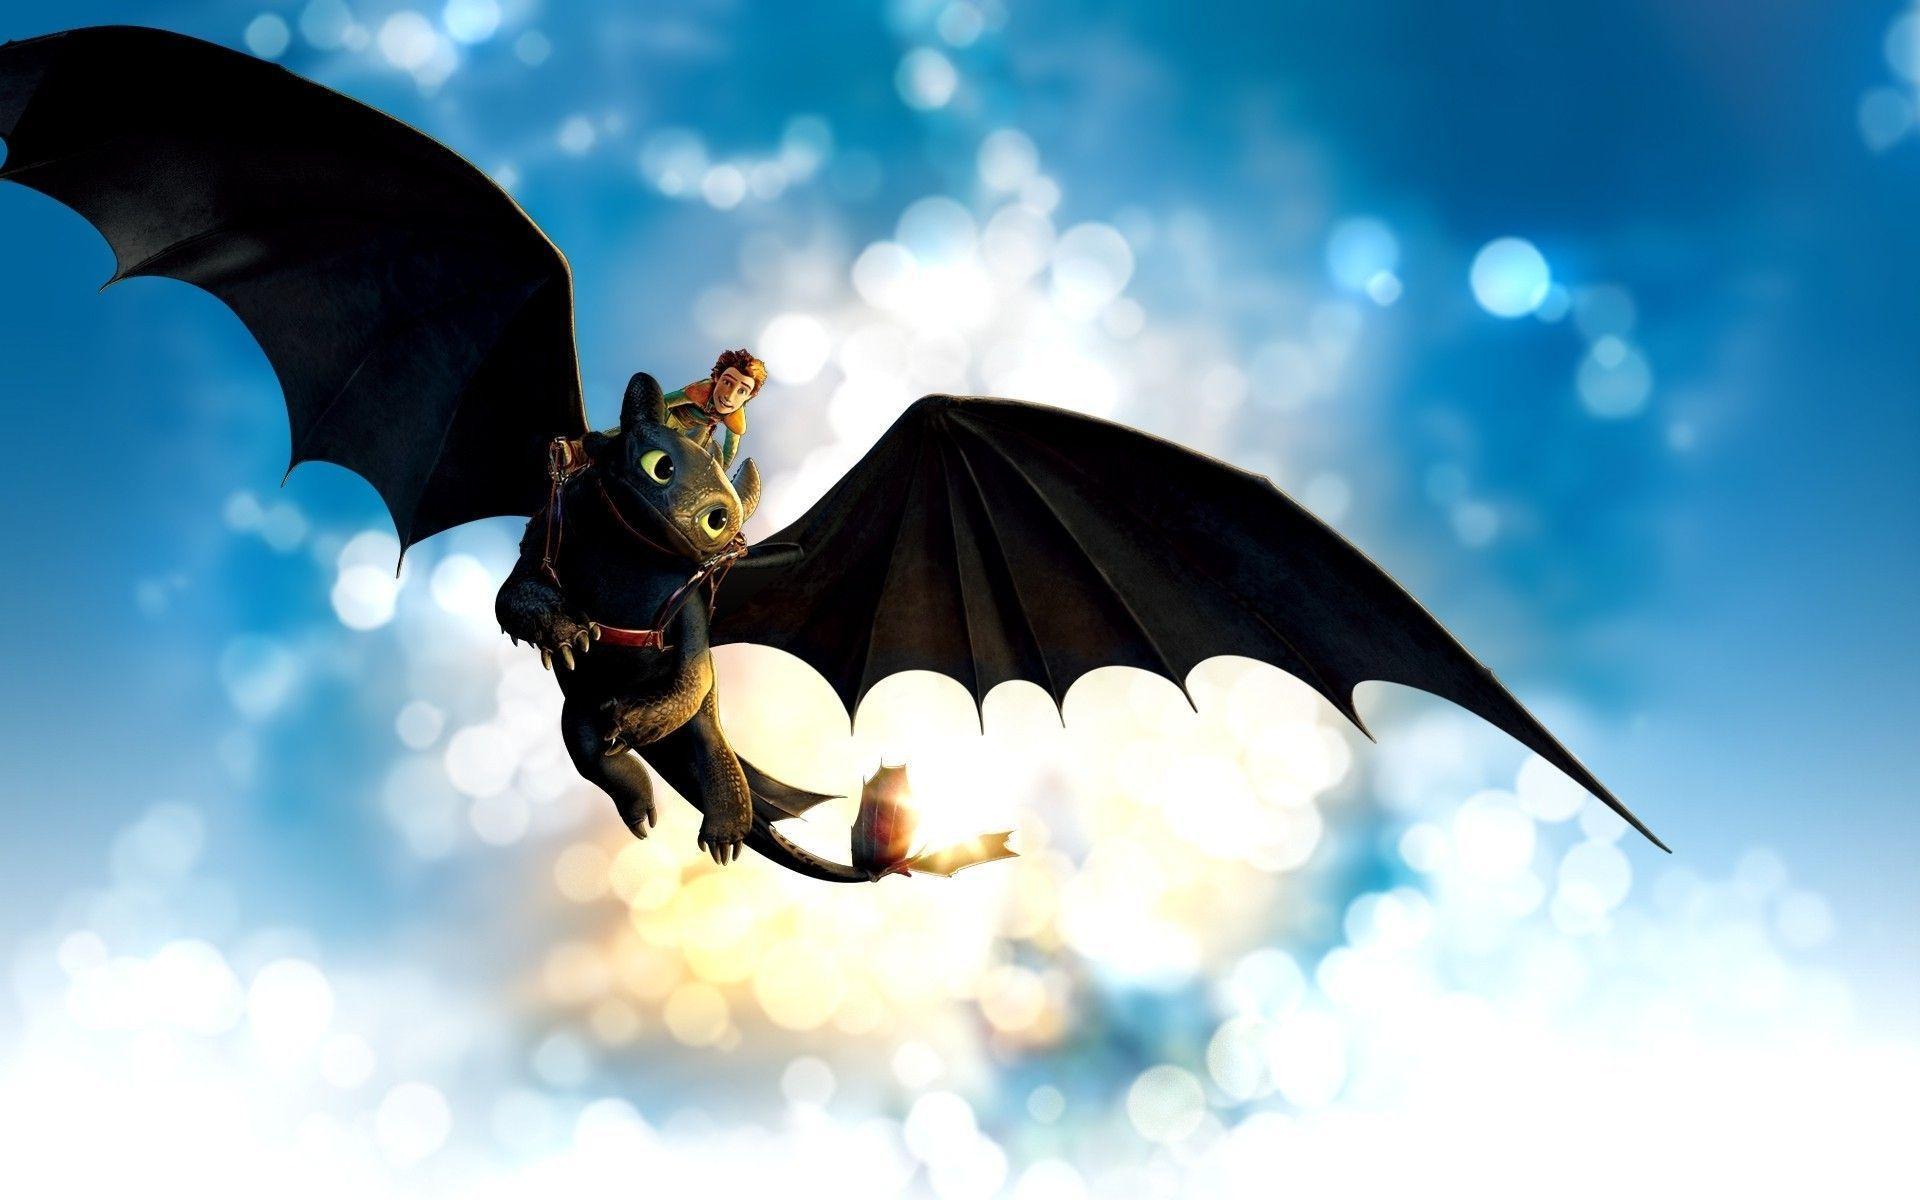  How To Train Your Dragon HD Wallpapers Backgrounds 